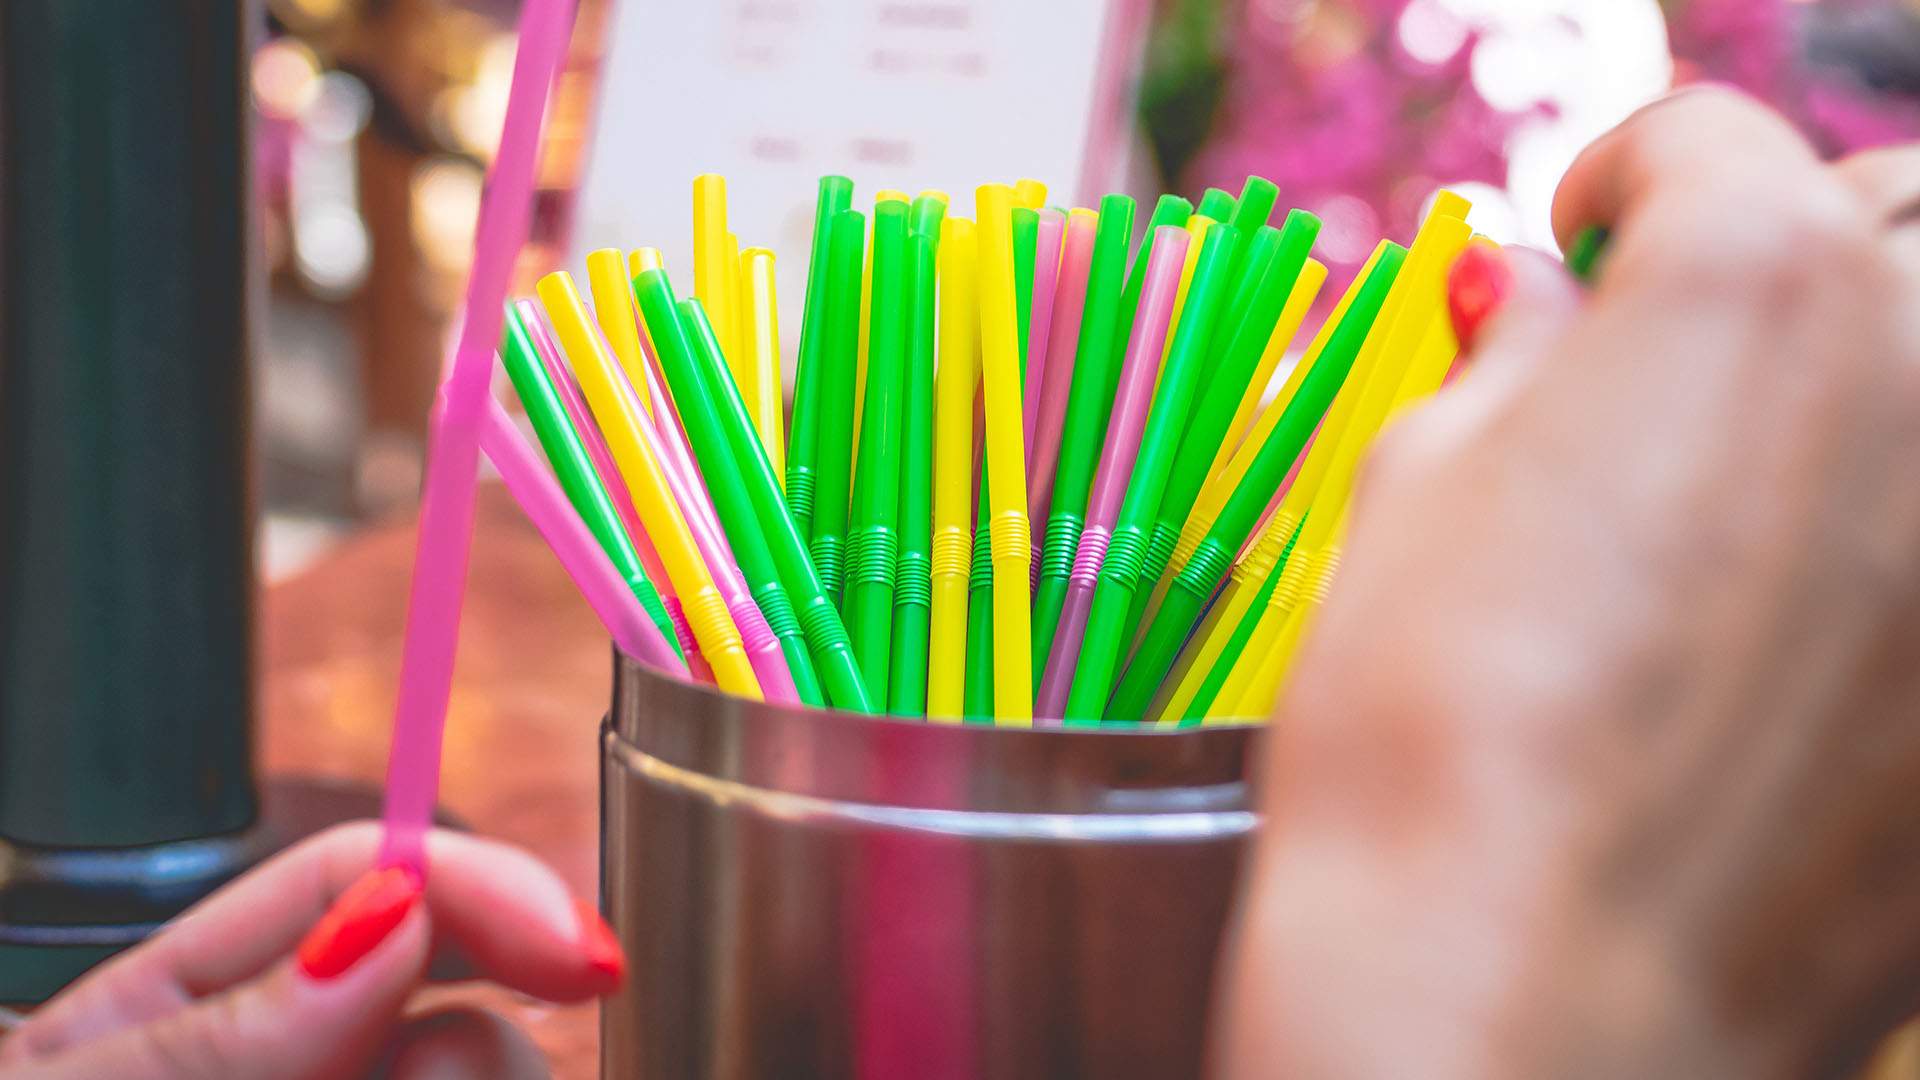 New South Wales' Ban on Single-Use Plastics Will Come Into Effect in Two Stages Starting on June 1